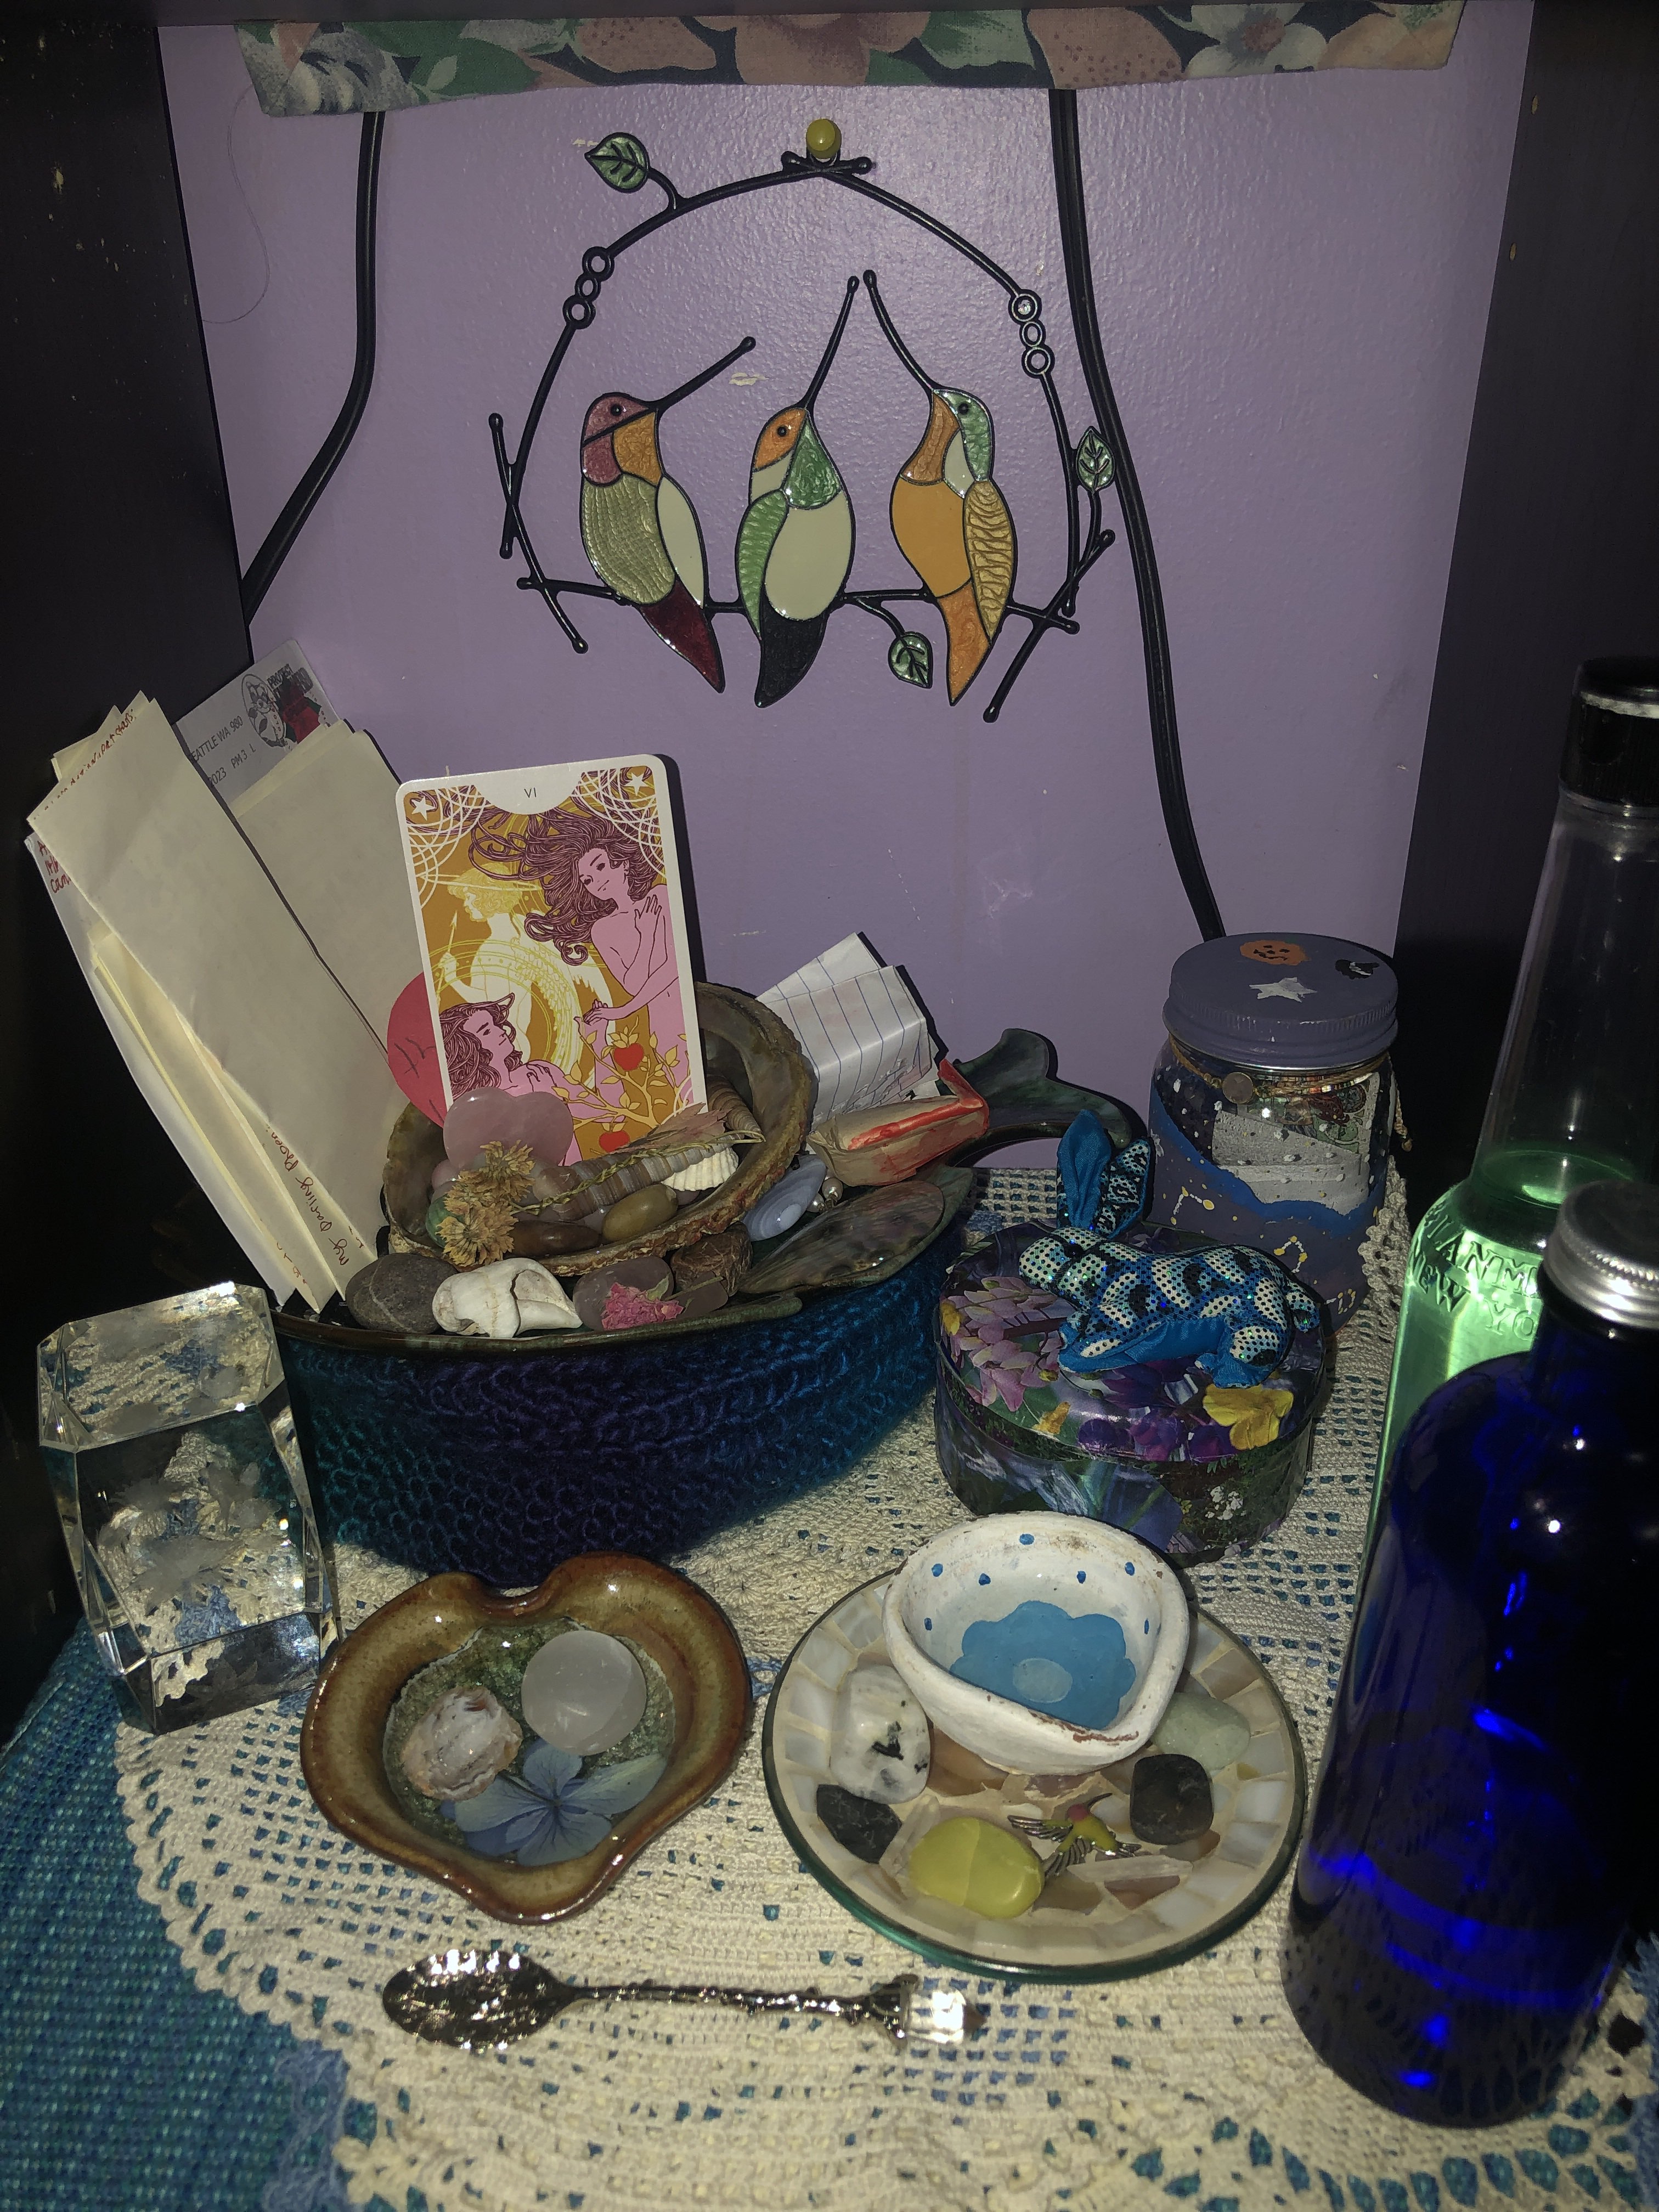 A photo of my altar devoted to Aphrodite. It has a blue placemat alongside white placemats above it. There are various objects on this altar such as a water bowl, various bottles, jars, spools and various crystals. On the wall behind it is a stained glass piece of hummingbirds.